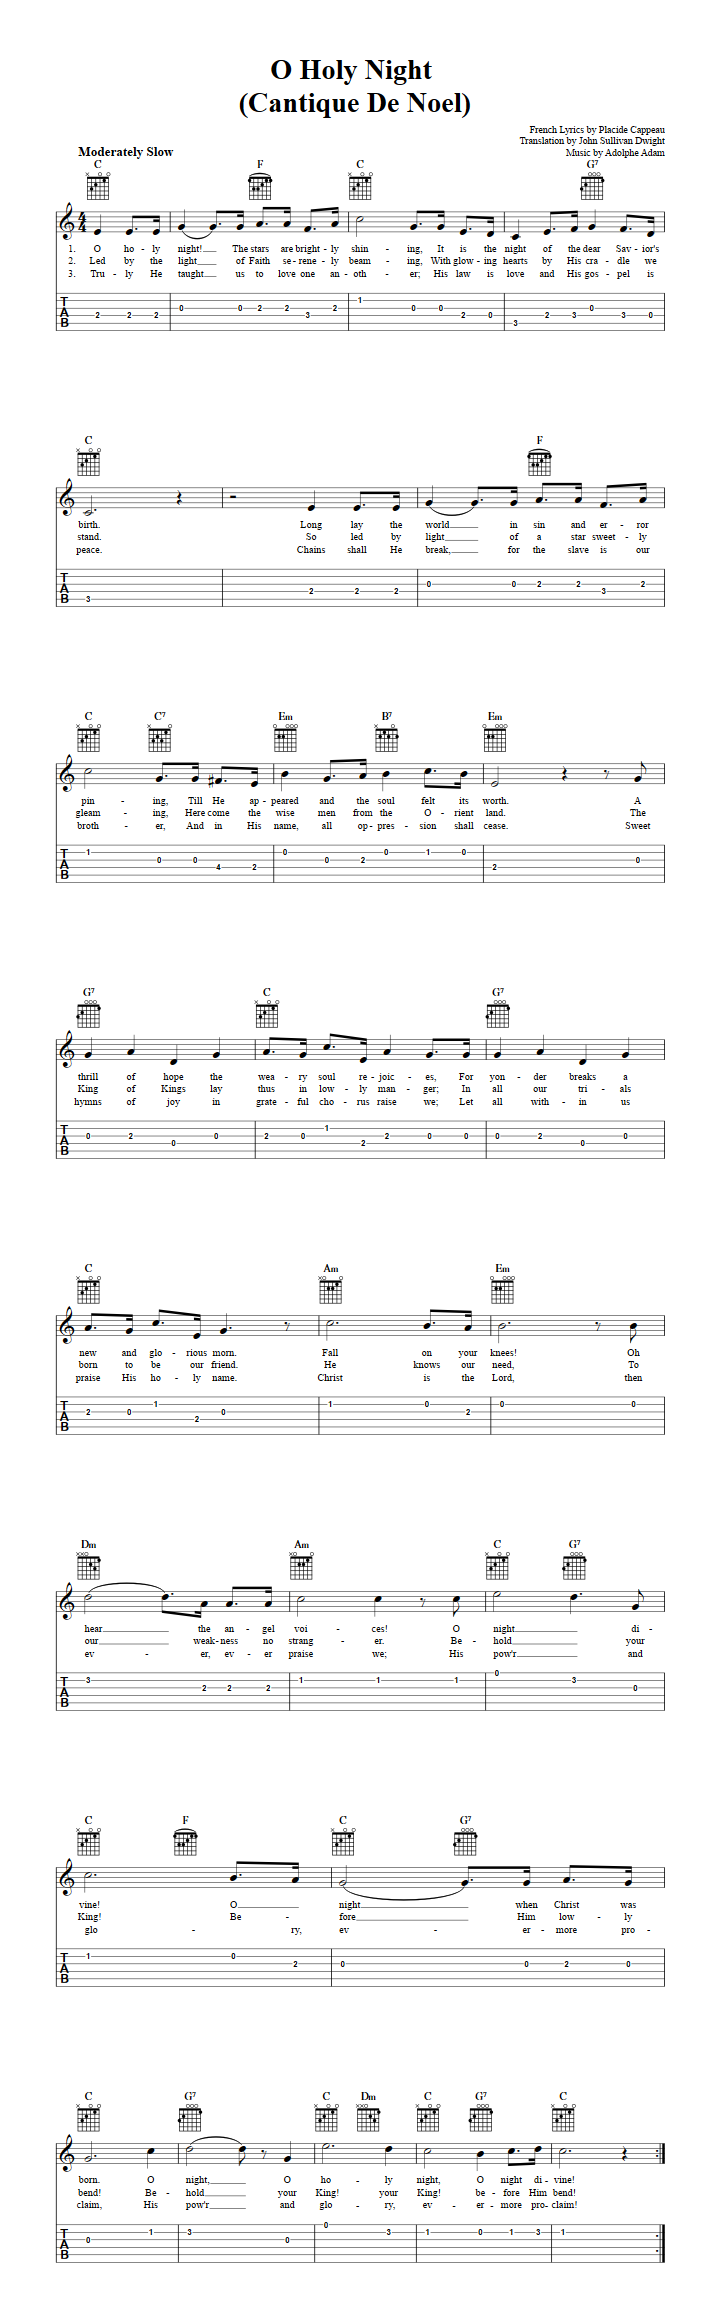 O Holy Night: Chords, Sheet Music, and Tab for Guitar with Lyrics